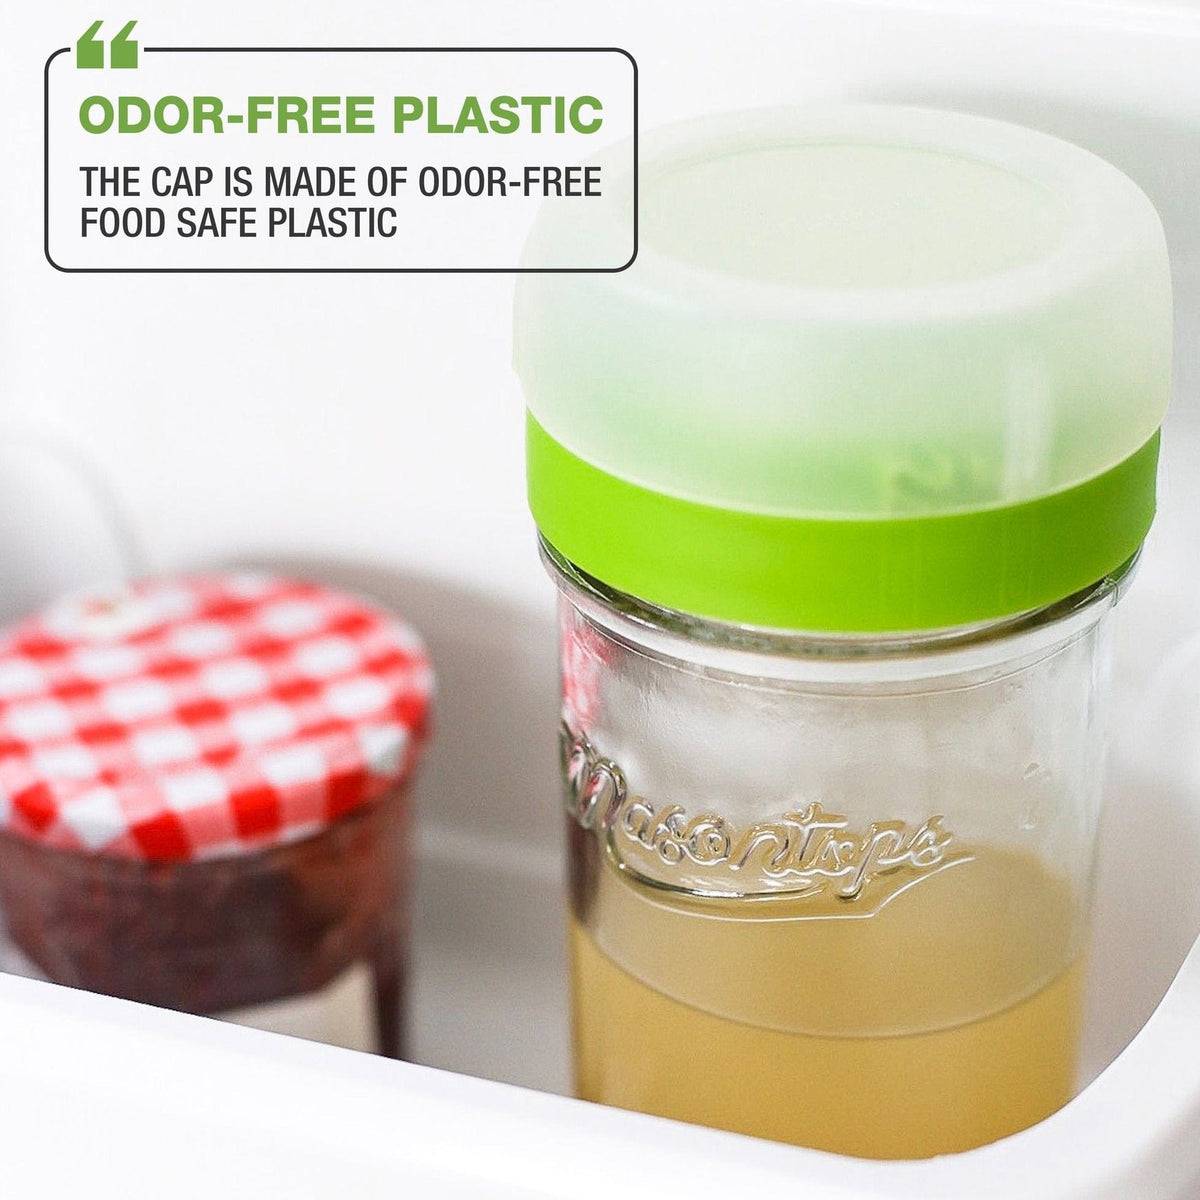 A photo of a mason jar with a label masontops in front filled with kefir. It has a text that says &quot;Odor-free Plastic&quot; The cap is made of odor-free food safe plastic.